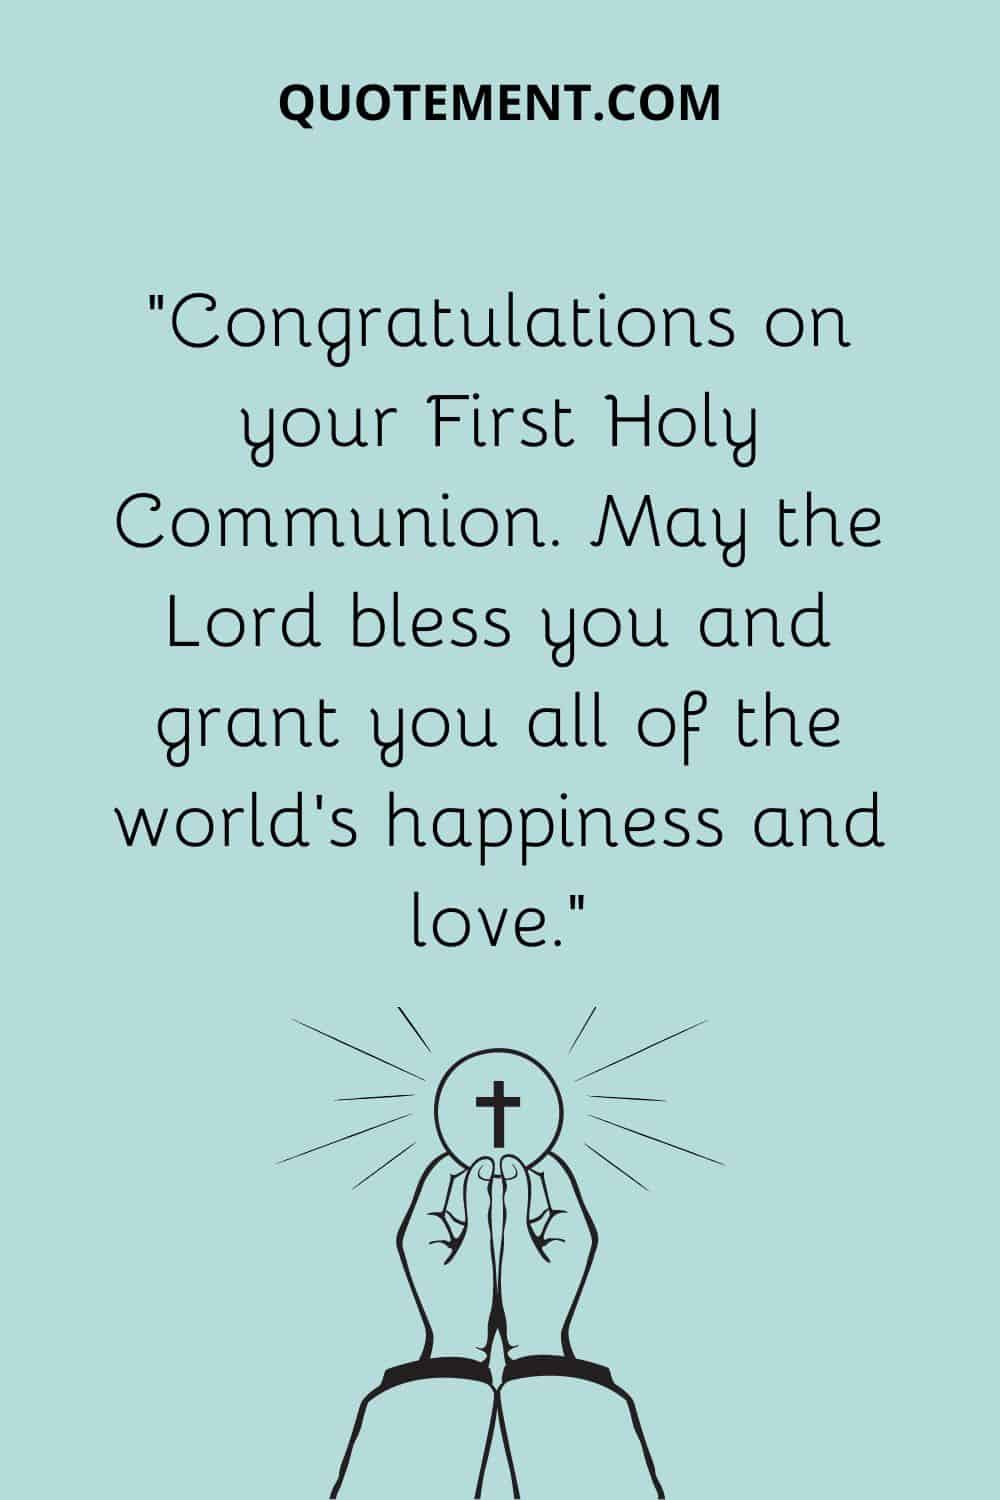 “Congratulations on your First Holy Communion. May the Lord bless you and grant you all of the world’s happiness and love.”